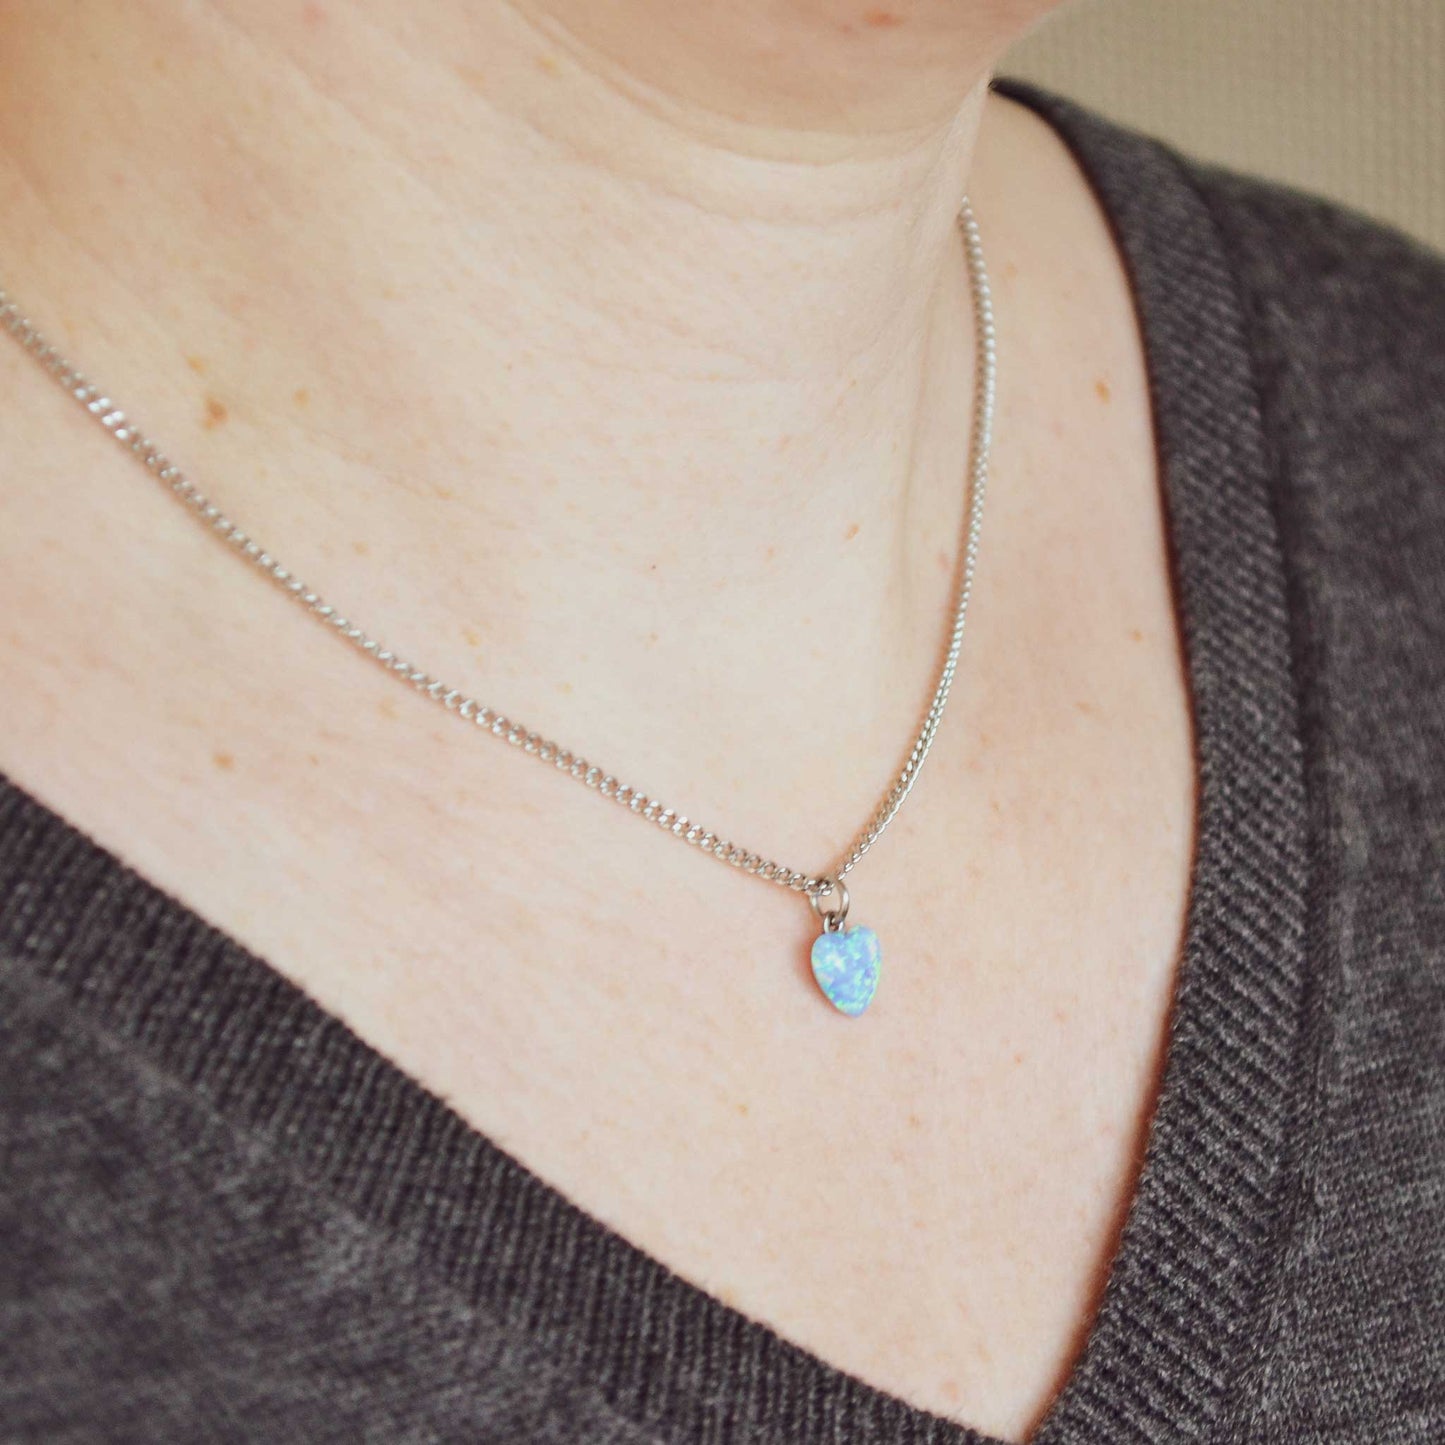 Woman wearing grey v neck jumper and dainty blue heart pendant necklace